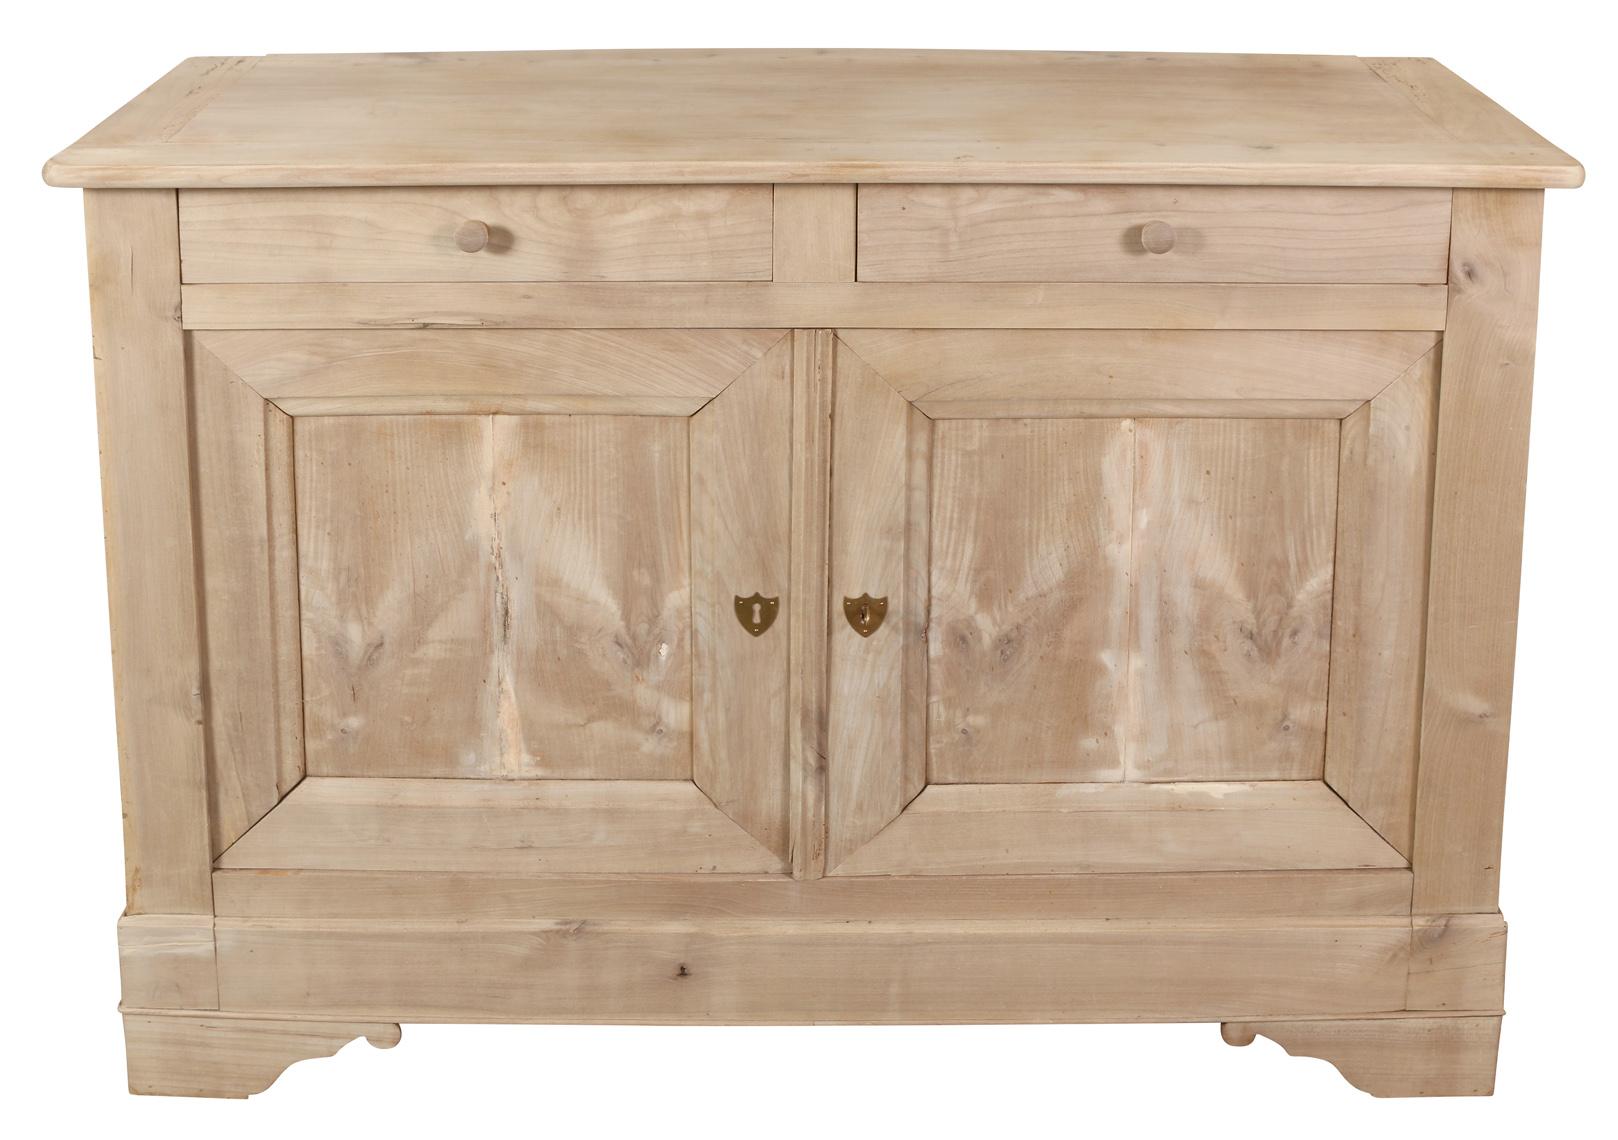 We like this buffet/server for its compact s size and clean lines. Raised on bracket feet, this useful piece features two drawers above two paneled doors.  The bleached finish gives the piece a more contemporary, fresh look.  Perfect as a dining